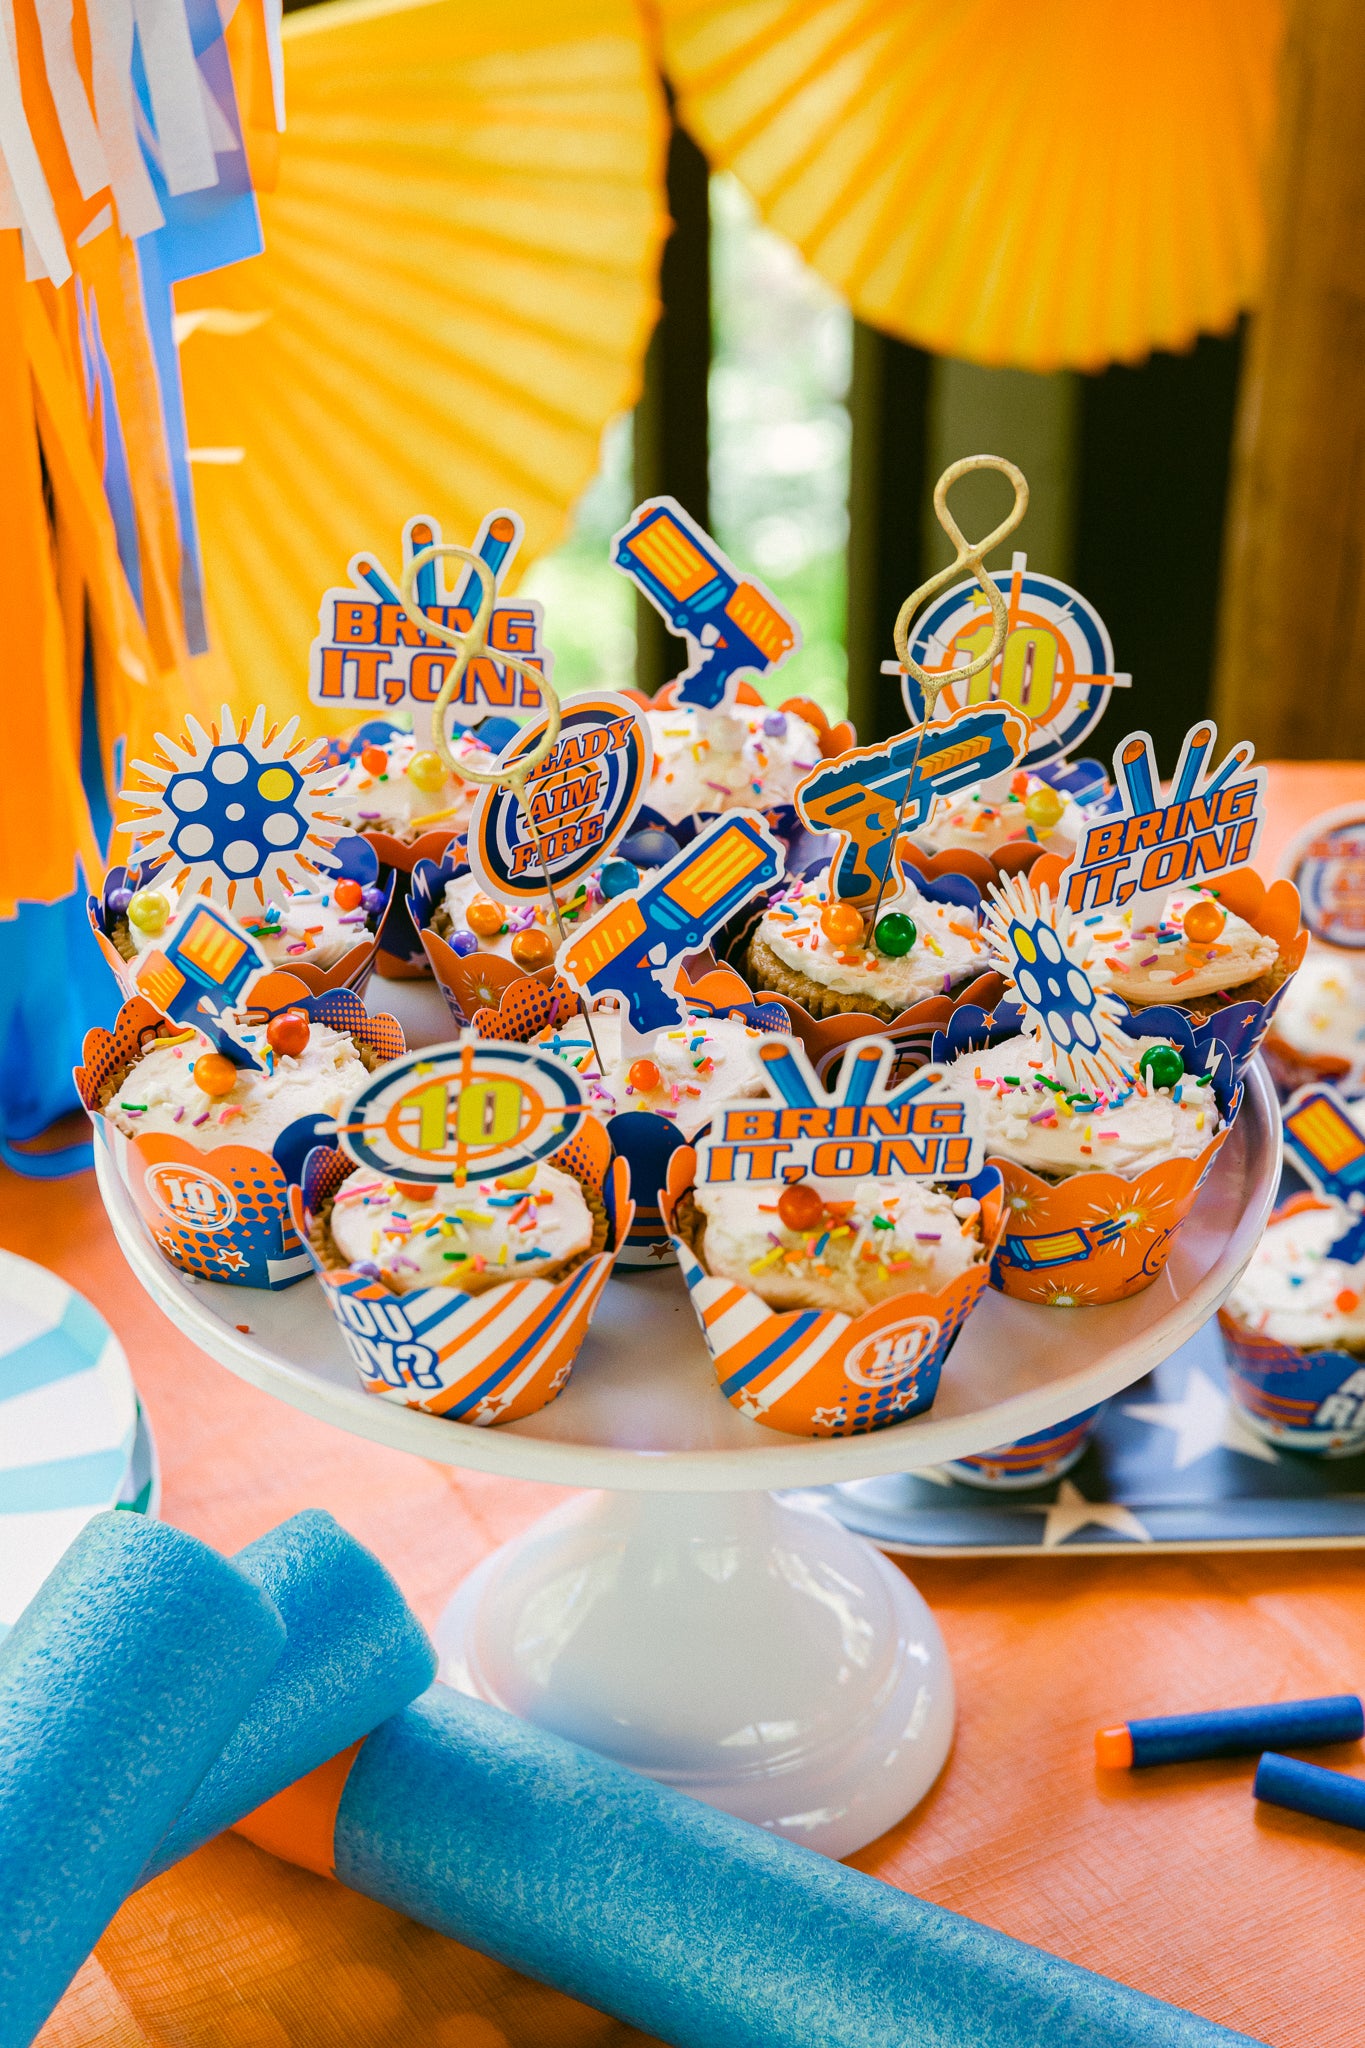 Nerf birthday party cupcakes with matching toppers and wrappers.